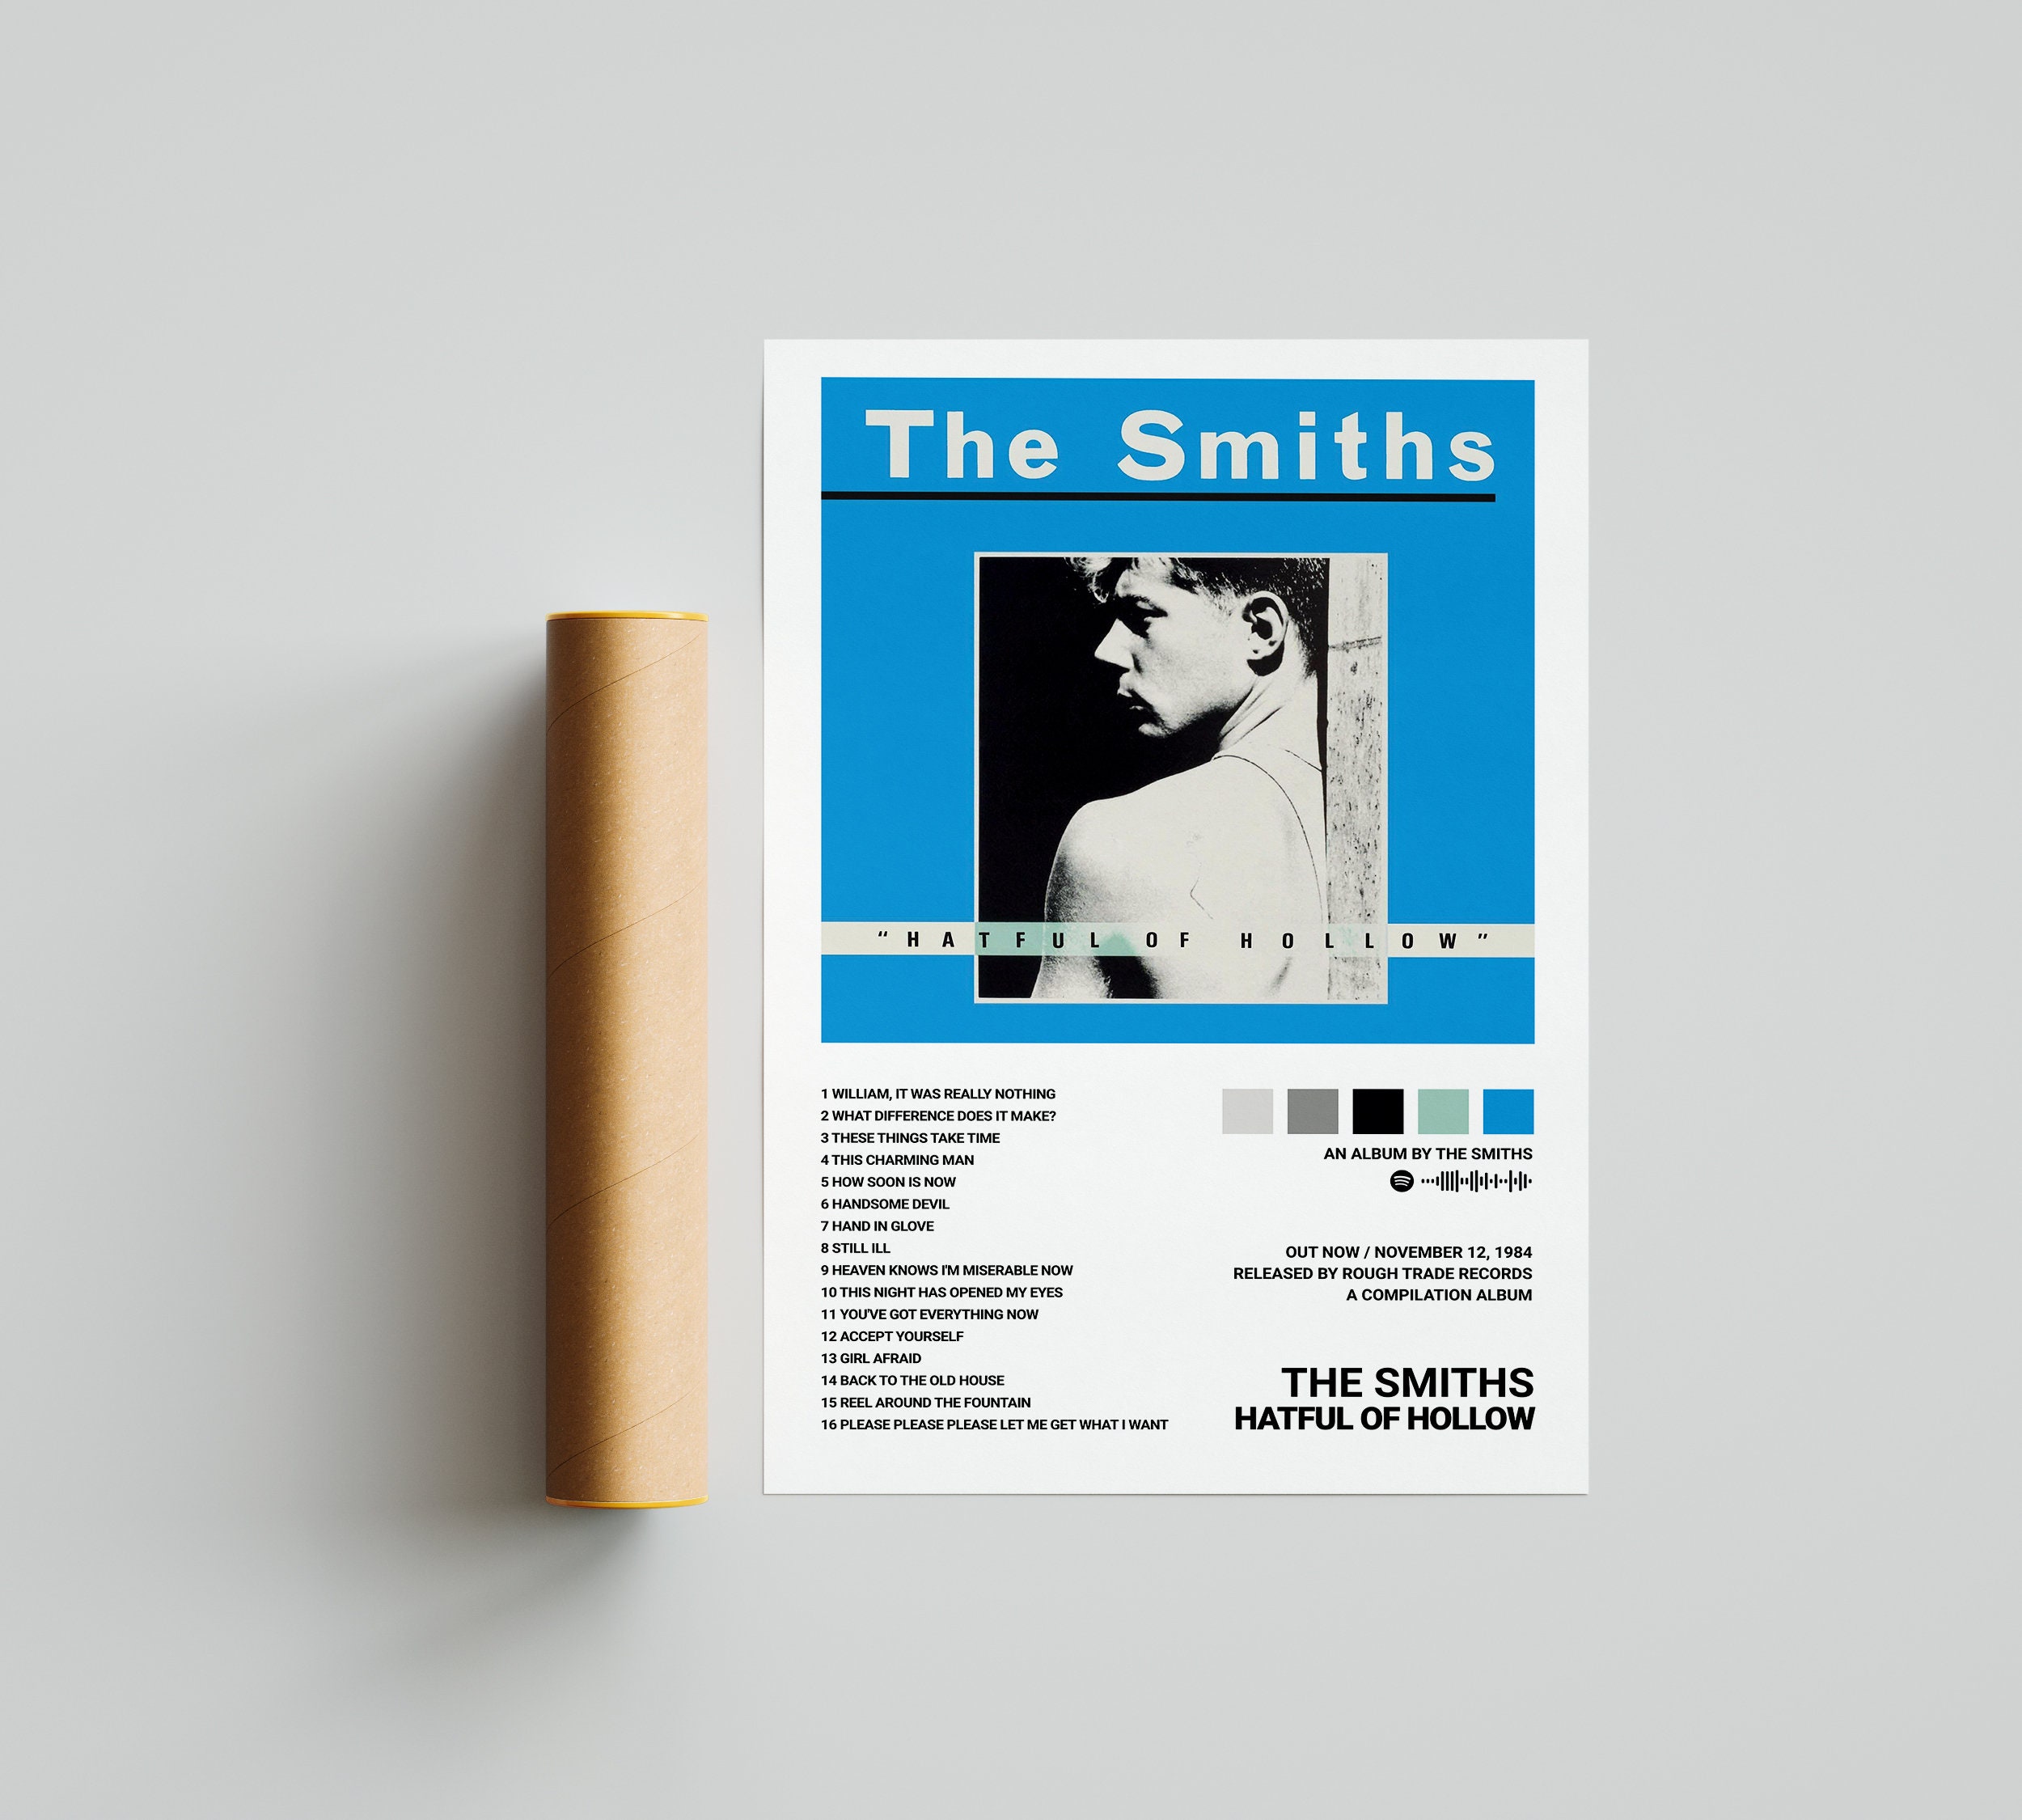 The Smiths Posters / Hatful of Hollow Poster